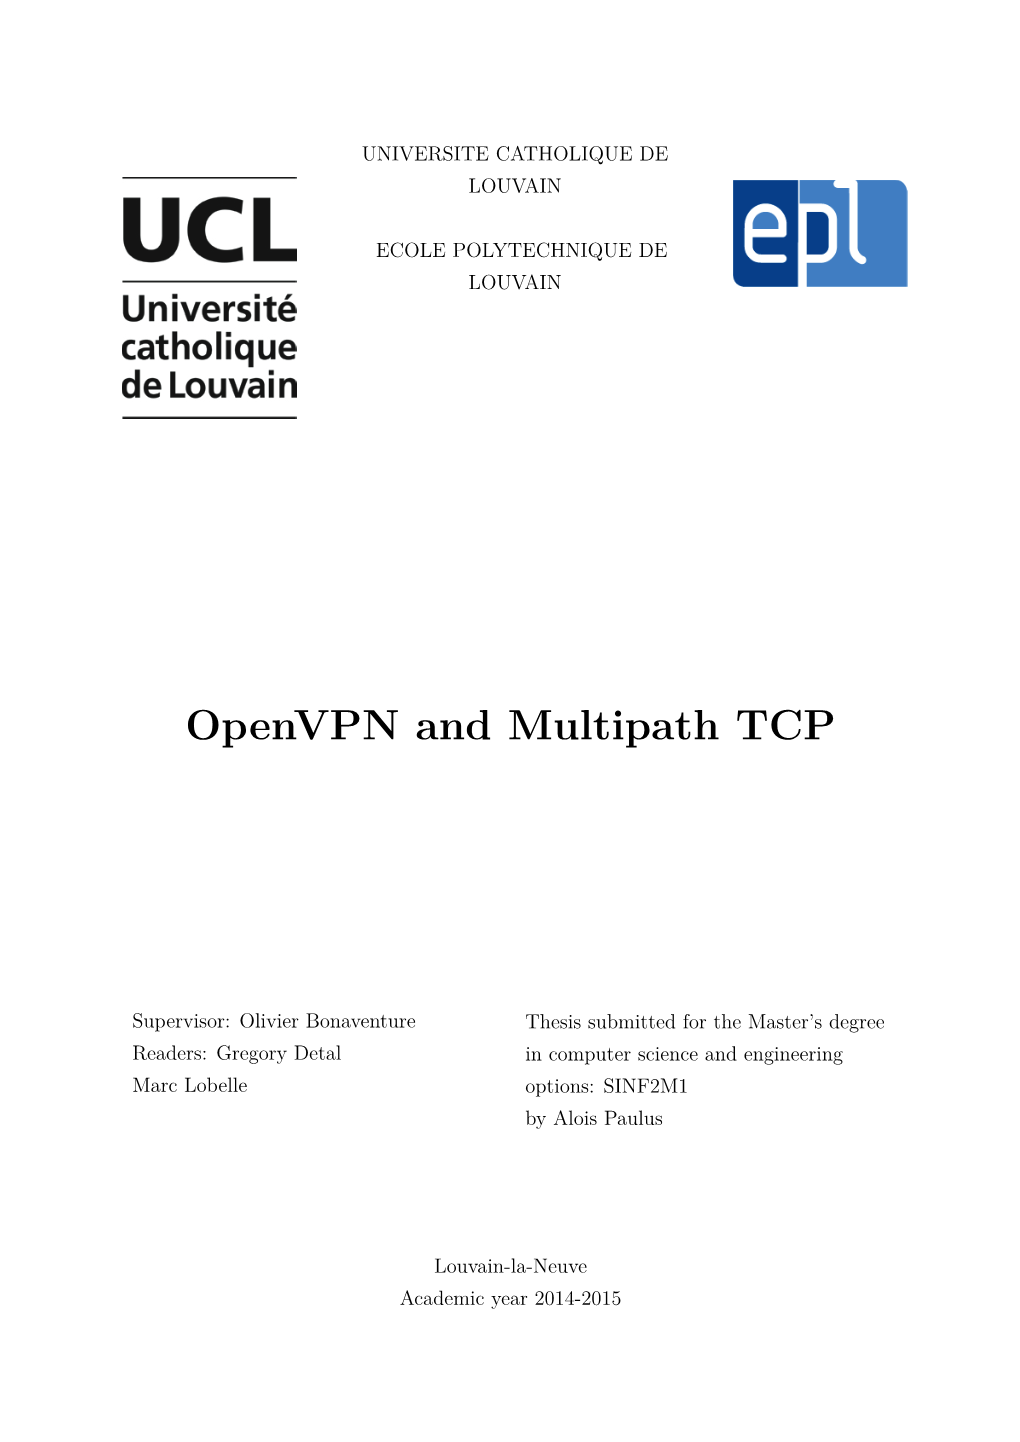 Openvpn and Multipath TCP